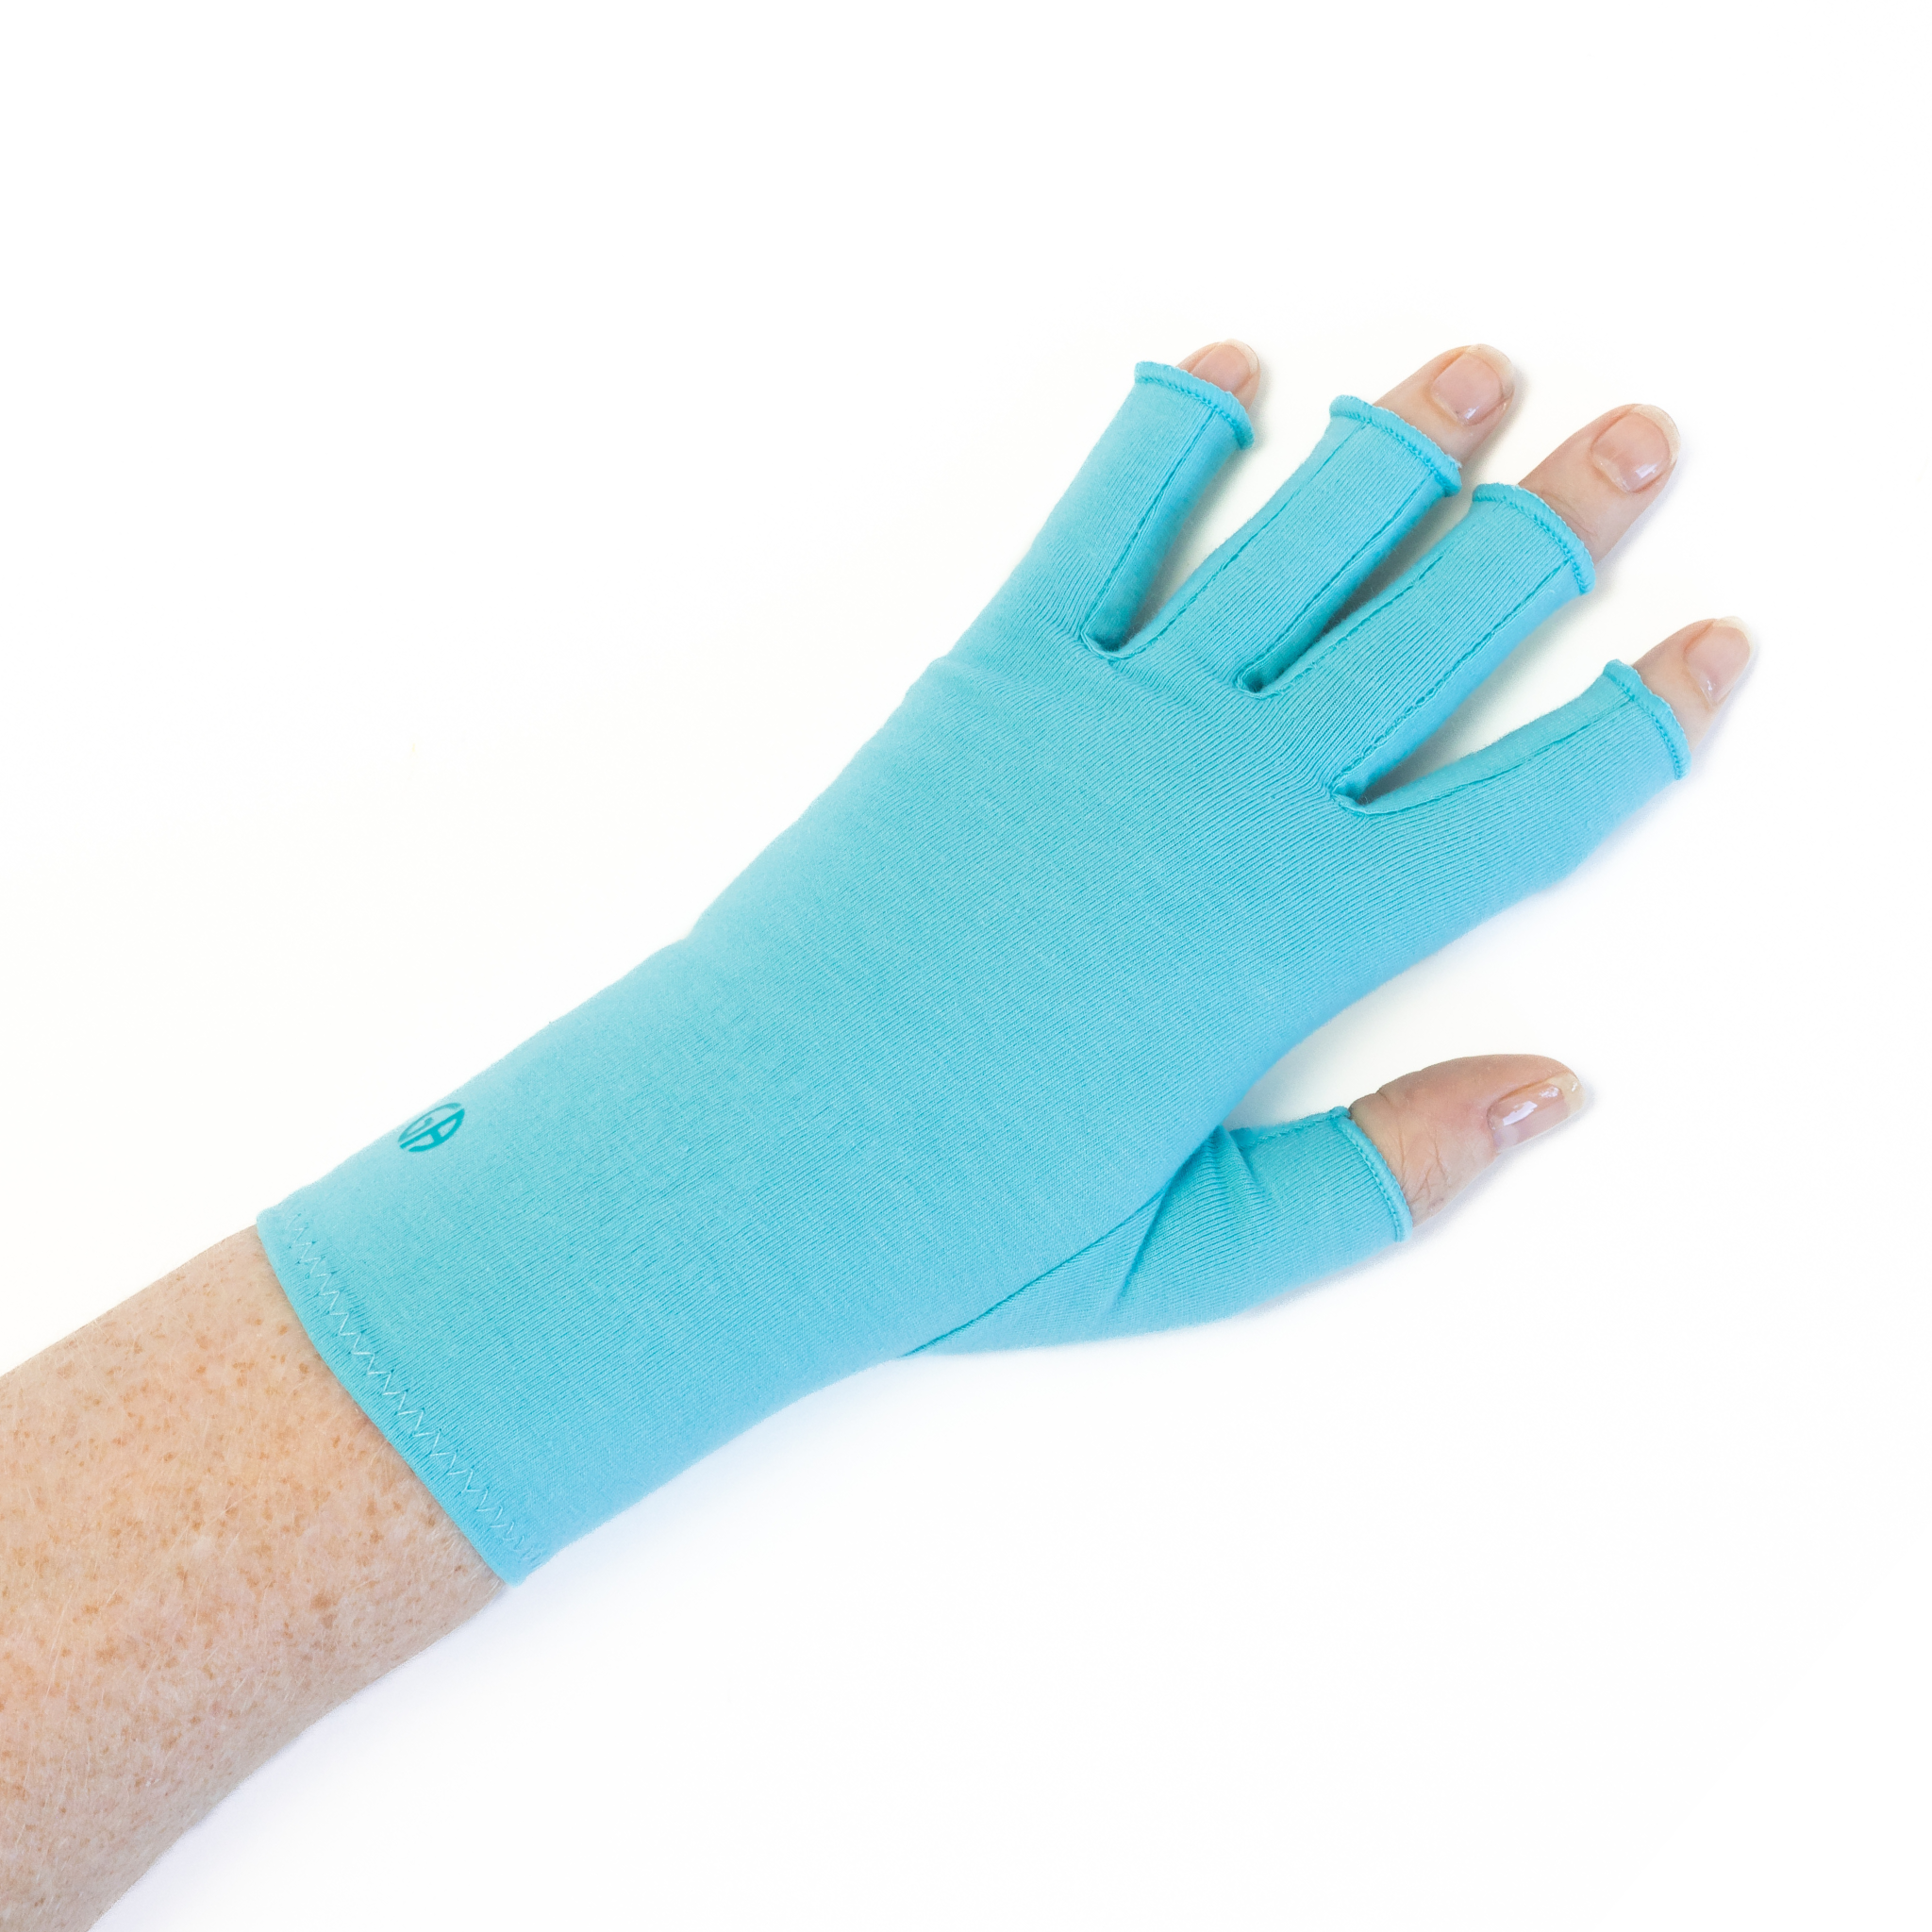 A close up of the hand of a woman with arthritis, wearing Aqua Blue Compression Gloves and showing the back of her hand.